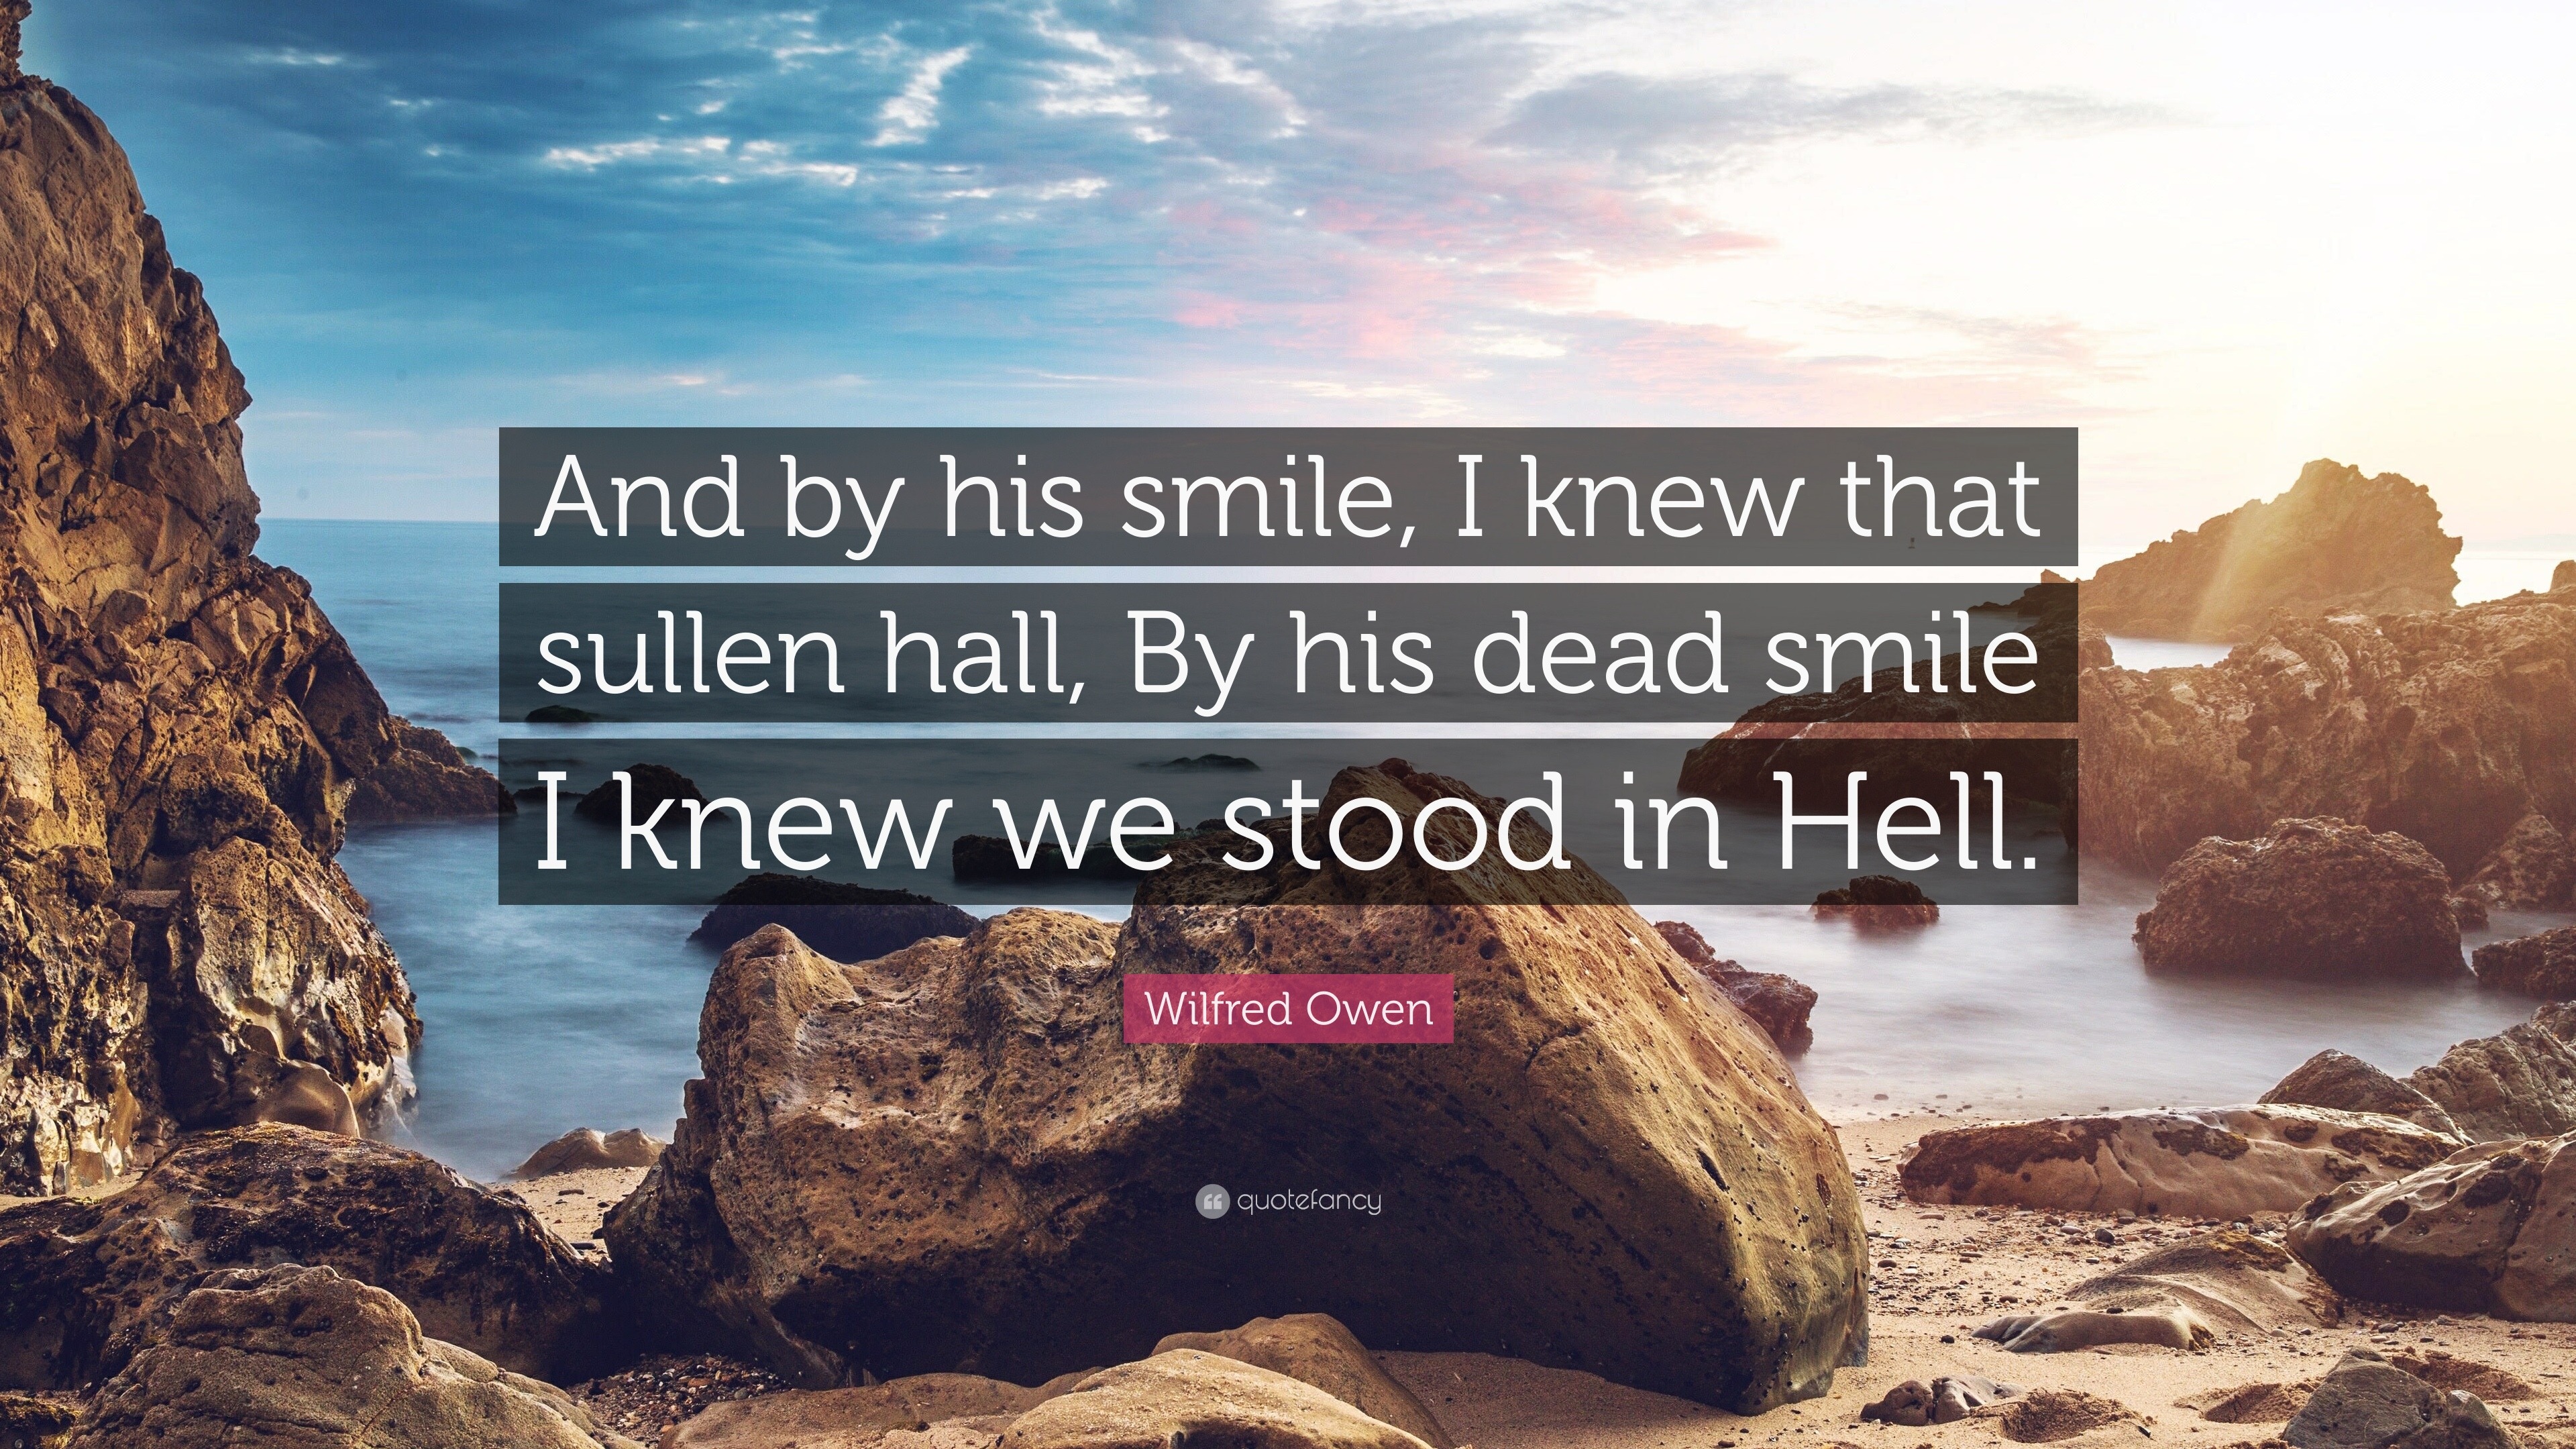 Wilfred Owen Quote: "And by his smile, I knew that sullen hall, By his dead smile I knew we ...